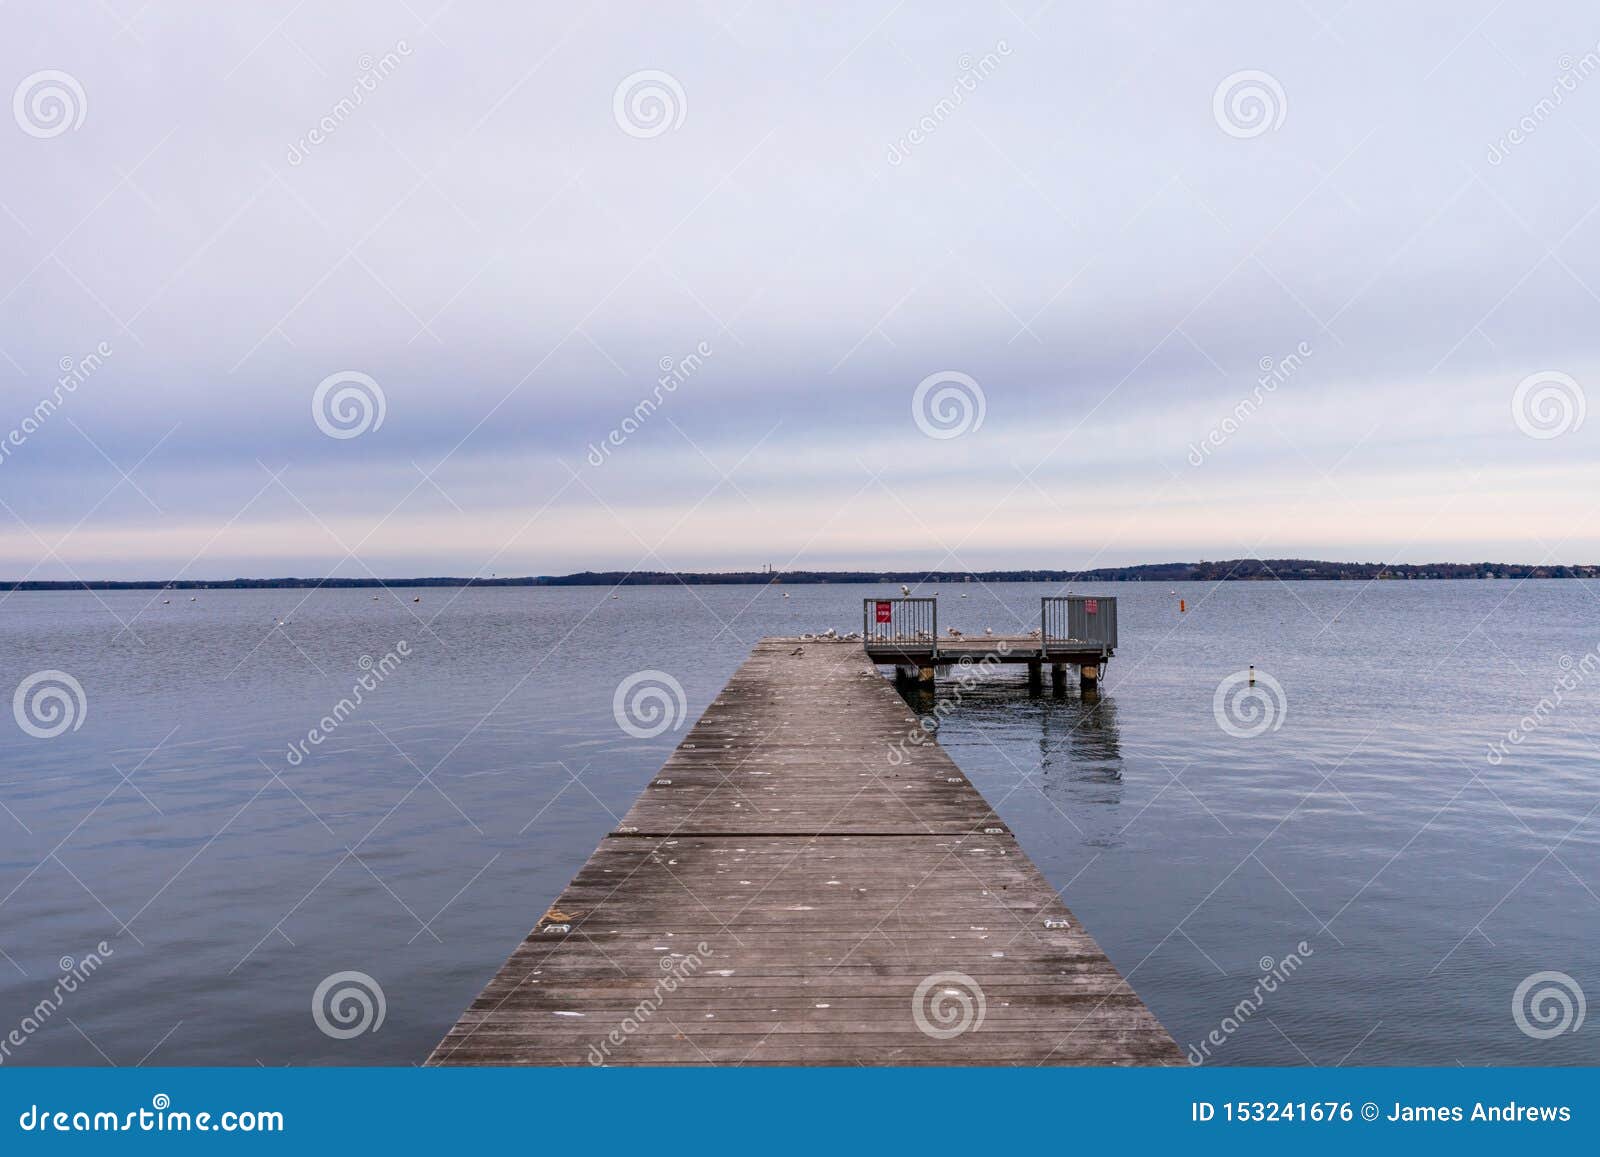 pier extending out to lake mendota in madison wisconsin